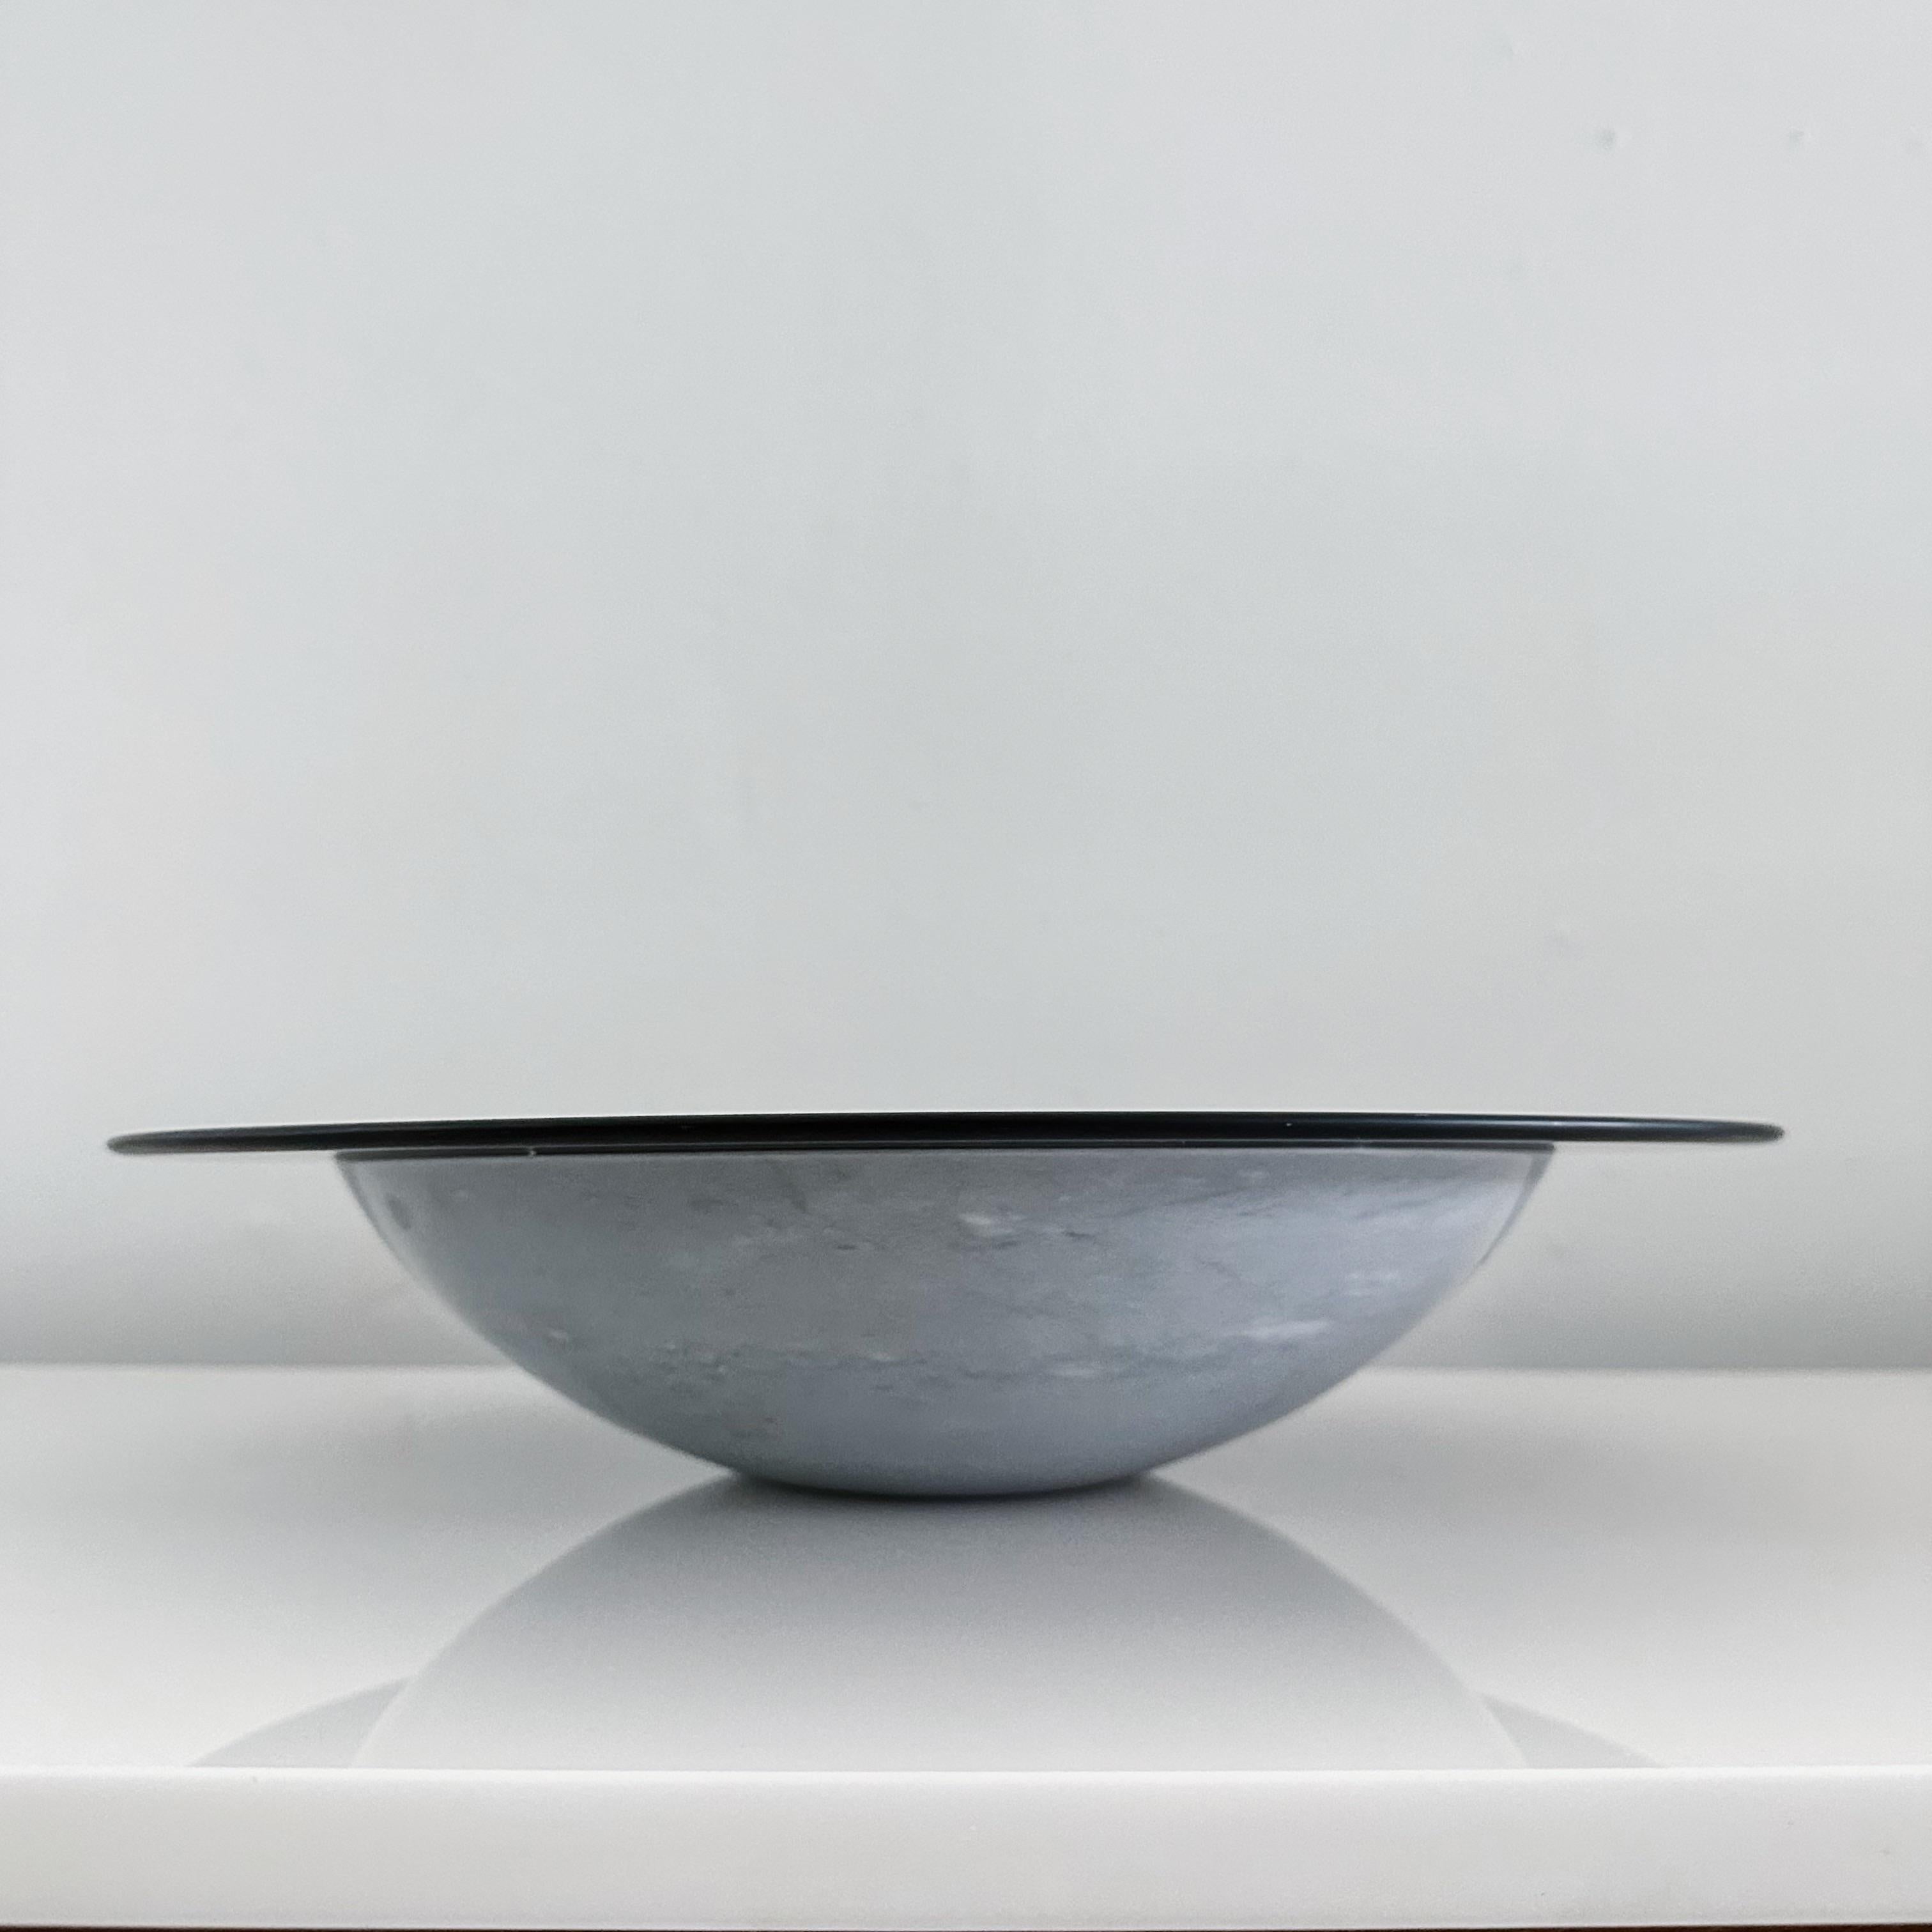 Hand-lathed Bardiglio marble bowl, with smooth slate border, by Guilio Lazzotti for Casigliani 